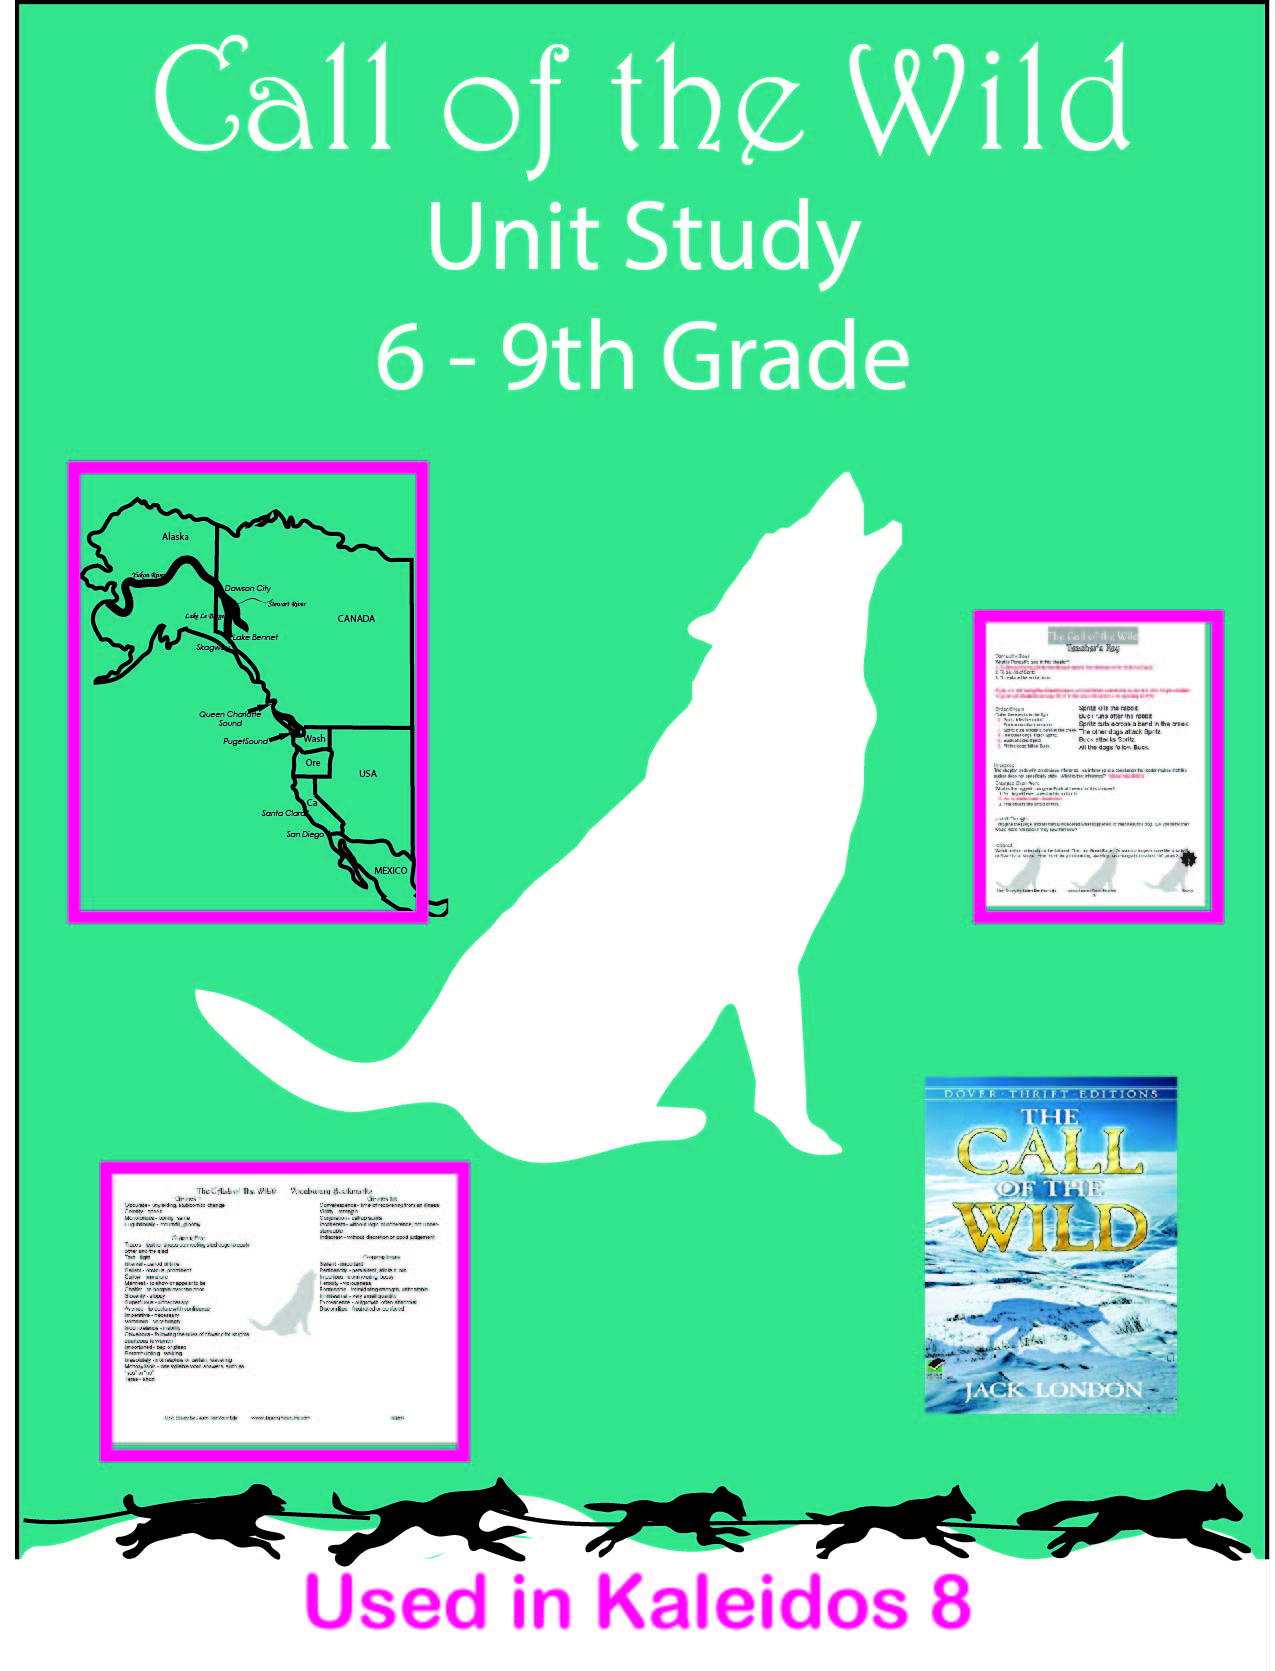 Call of the Wild Unit Study Poster